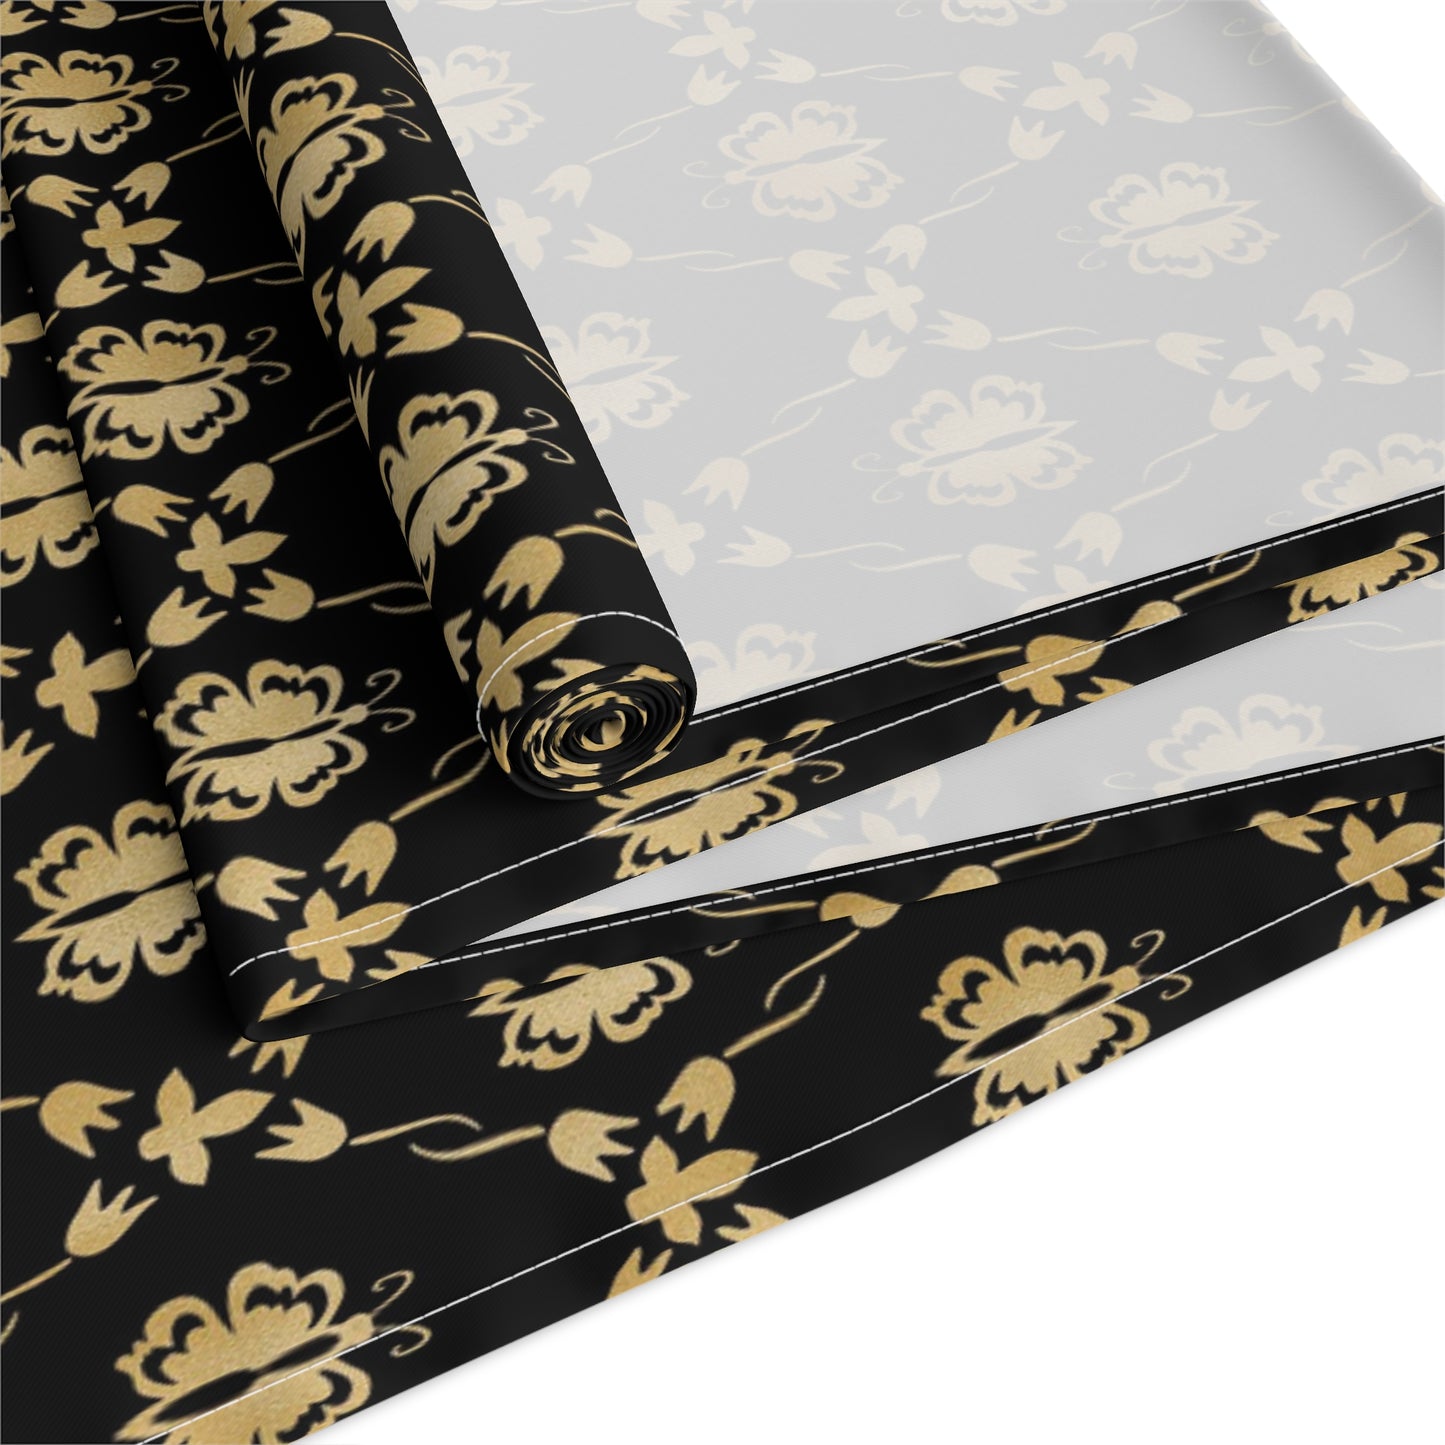 Black Gold Table Runner, Elegant Table Decoration, Modern Holiday Table Cloth